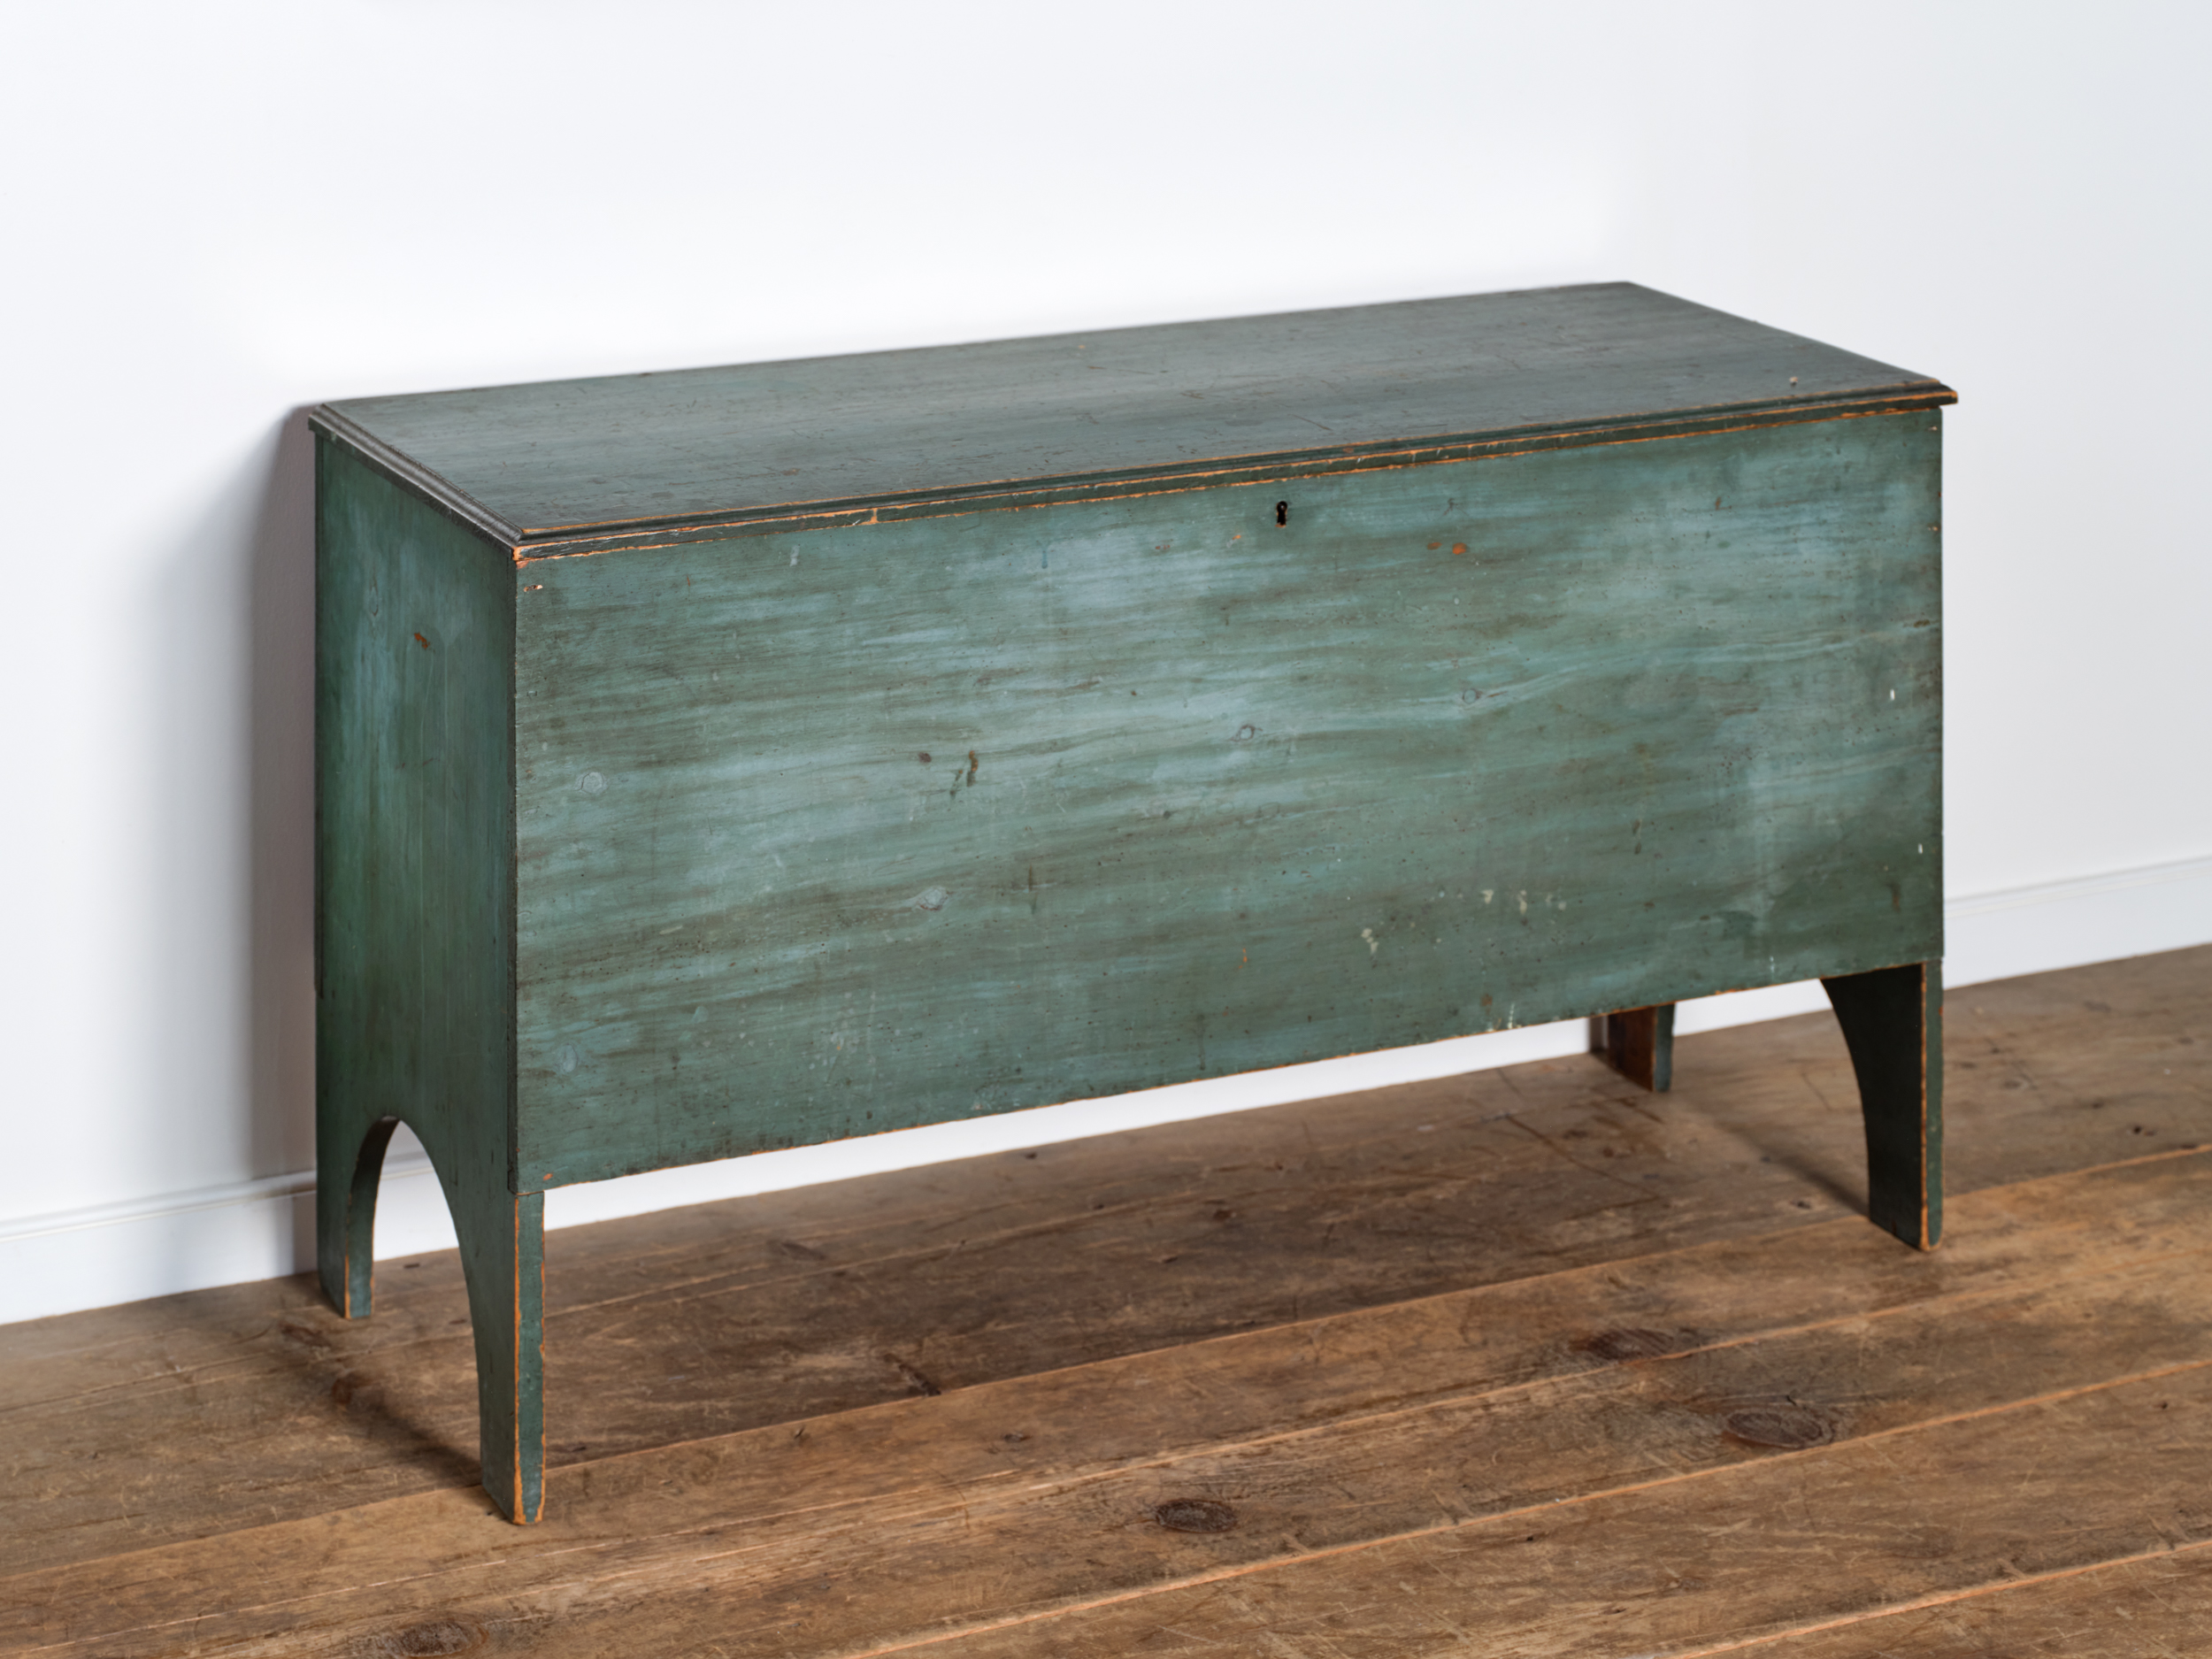 teal painted blanket chest rel=